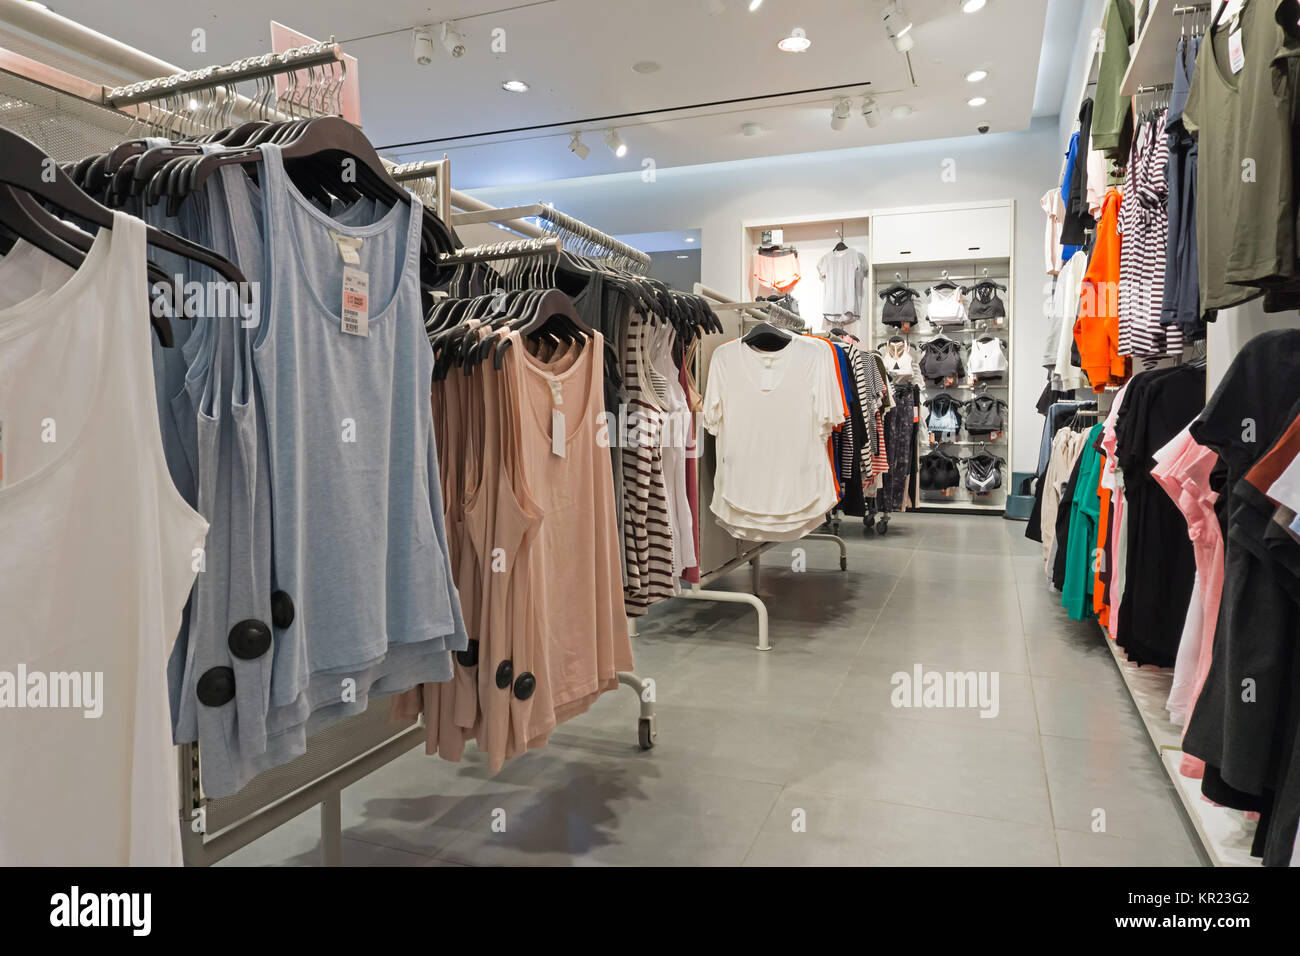 Kota Kinabalu, Malaysia - December 14, 2017: Inside of H and M store in Imago Shopping Mall. H&M is a Swedish multinational retail-clothing company fo Stock Photo